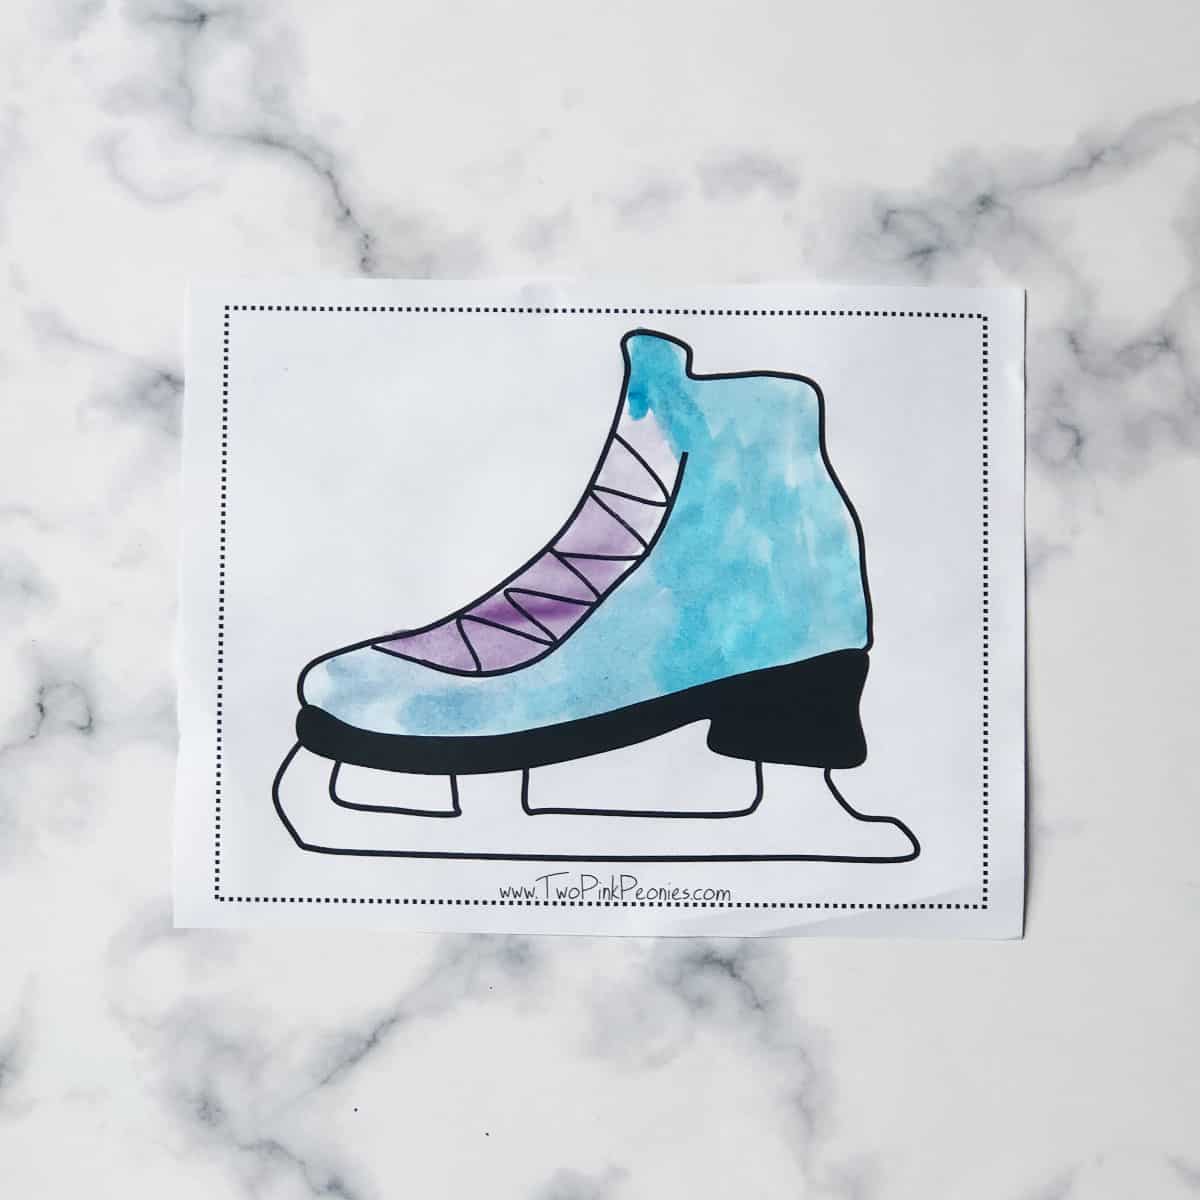 The ice skate template with water colors on it. 